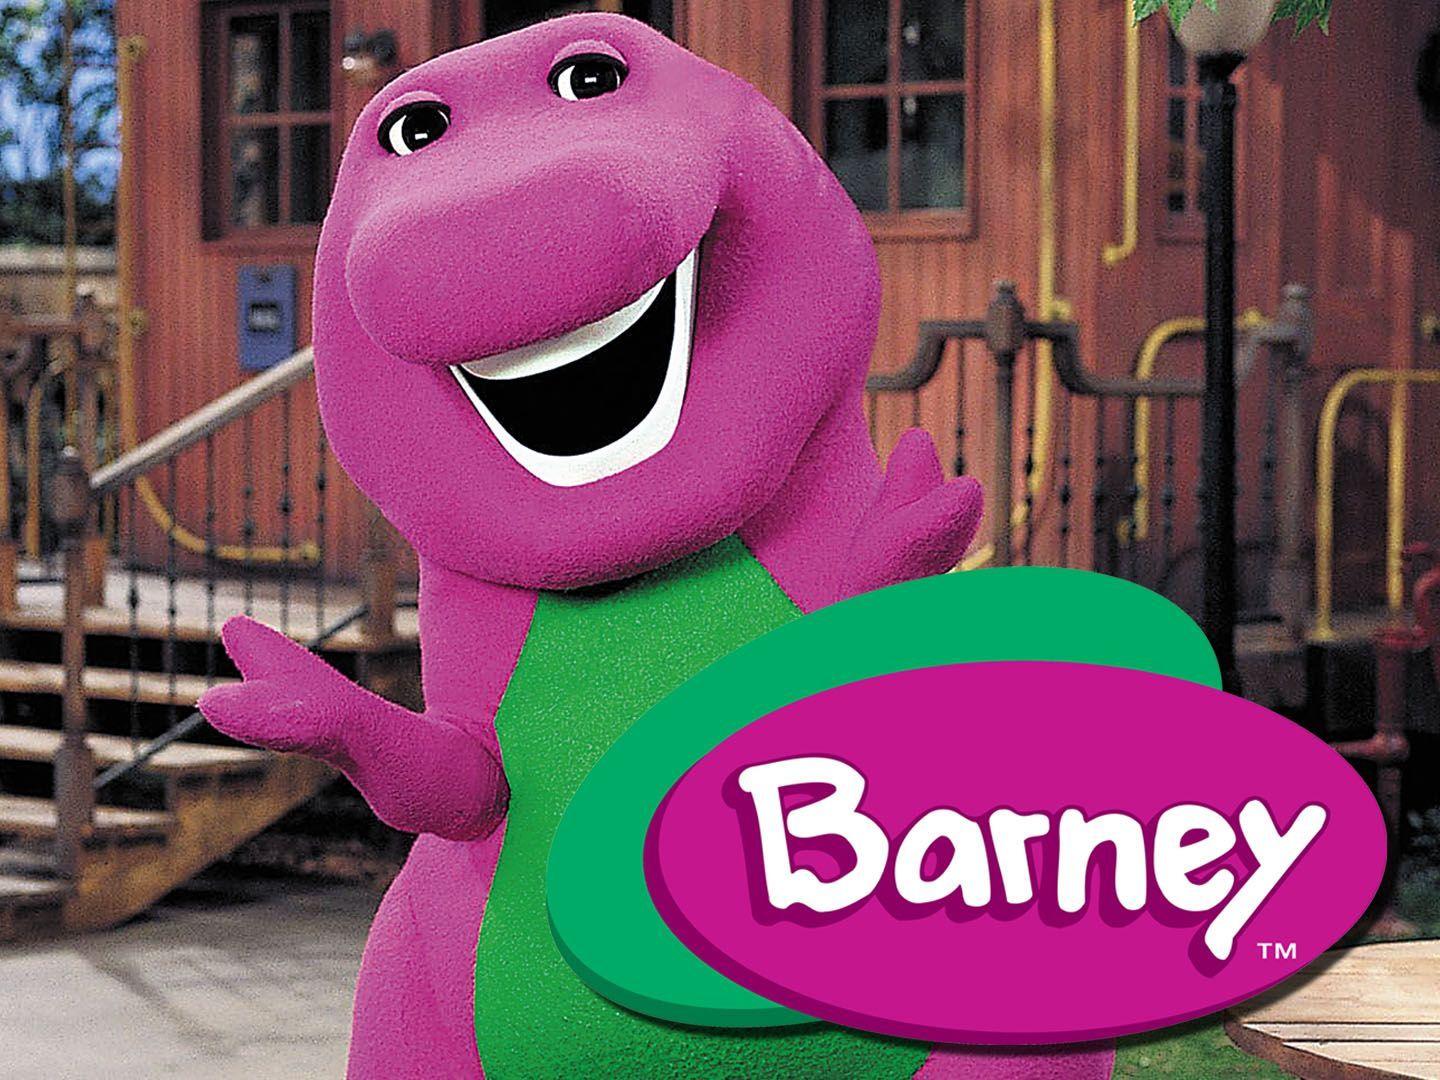 barney and friends wallpaper (46+ images) on barney wallpaper